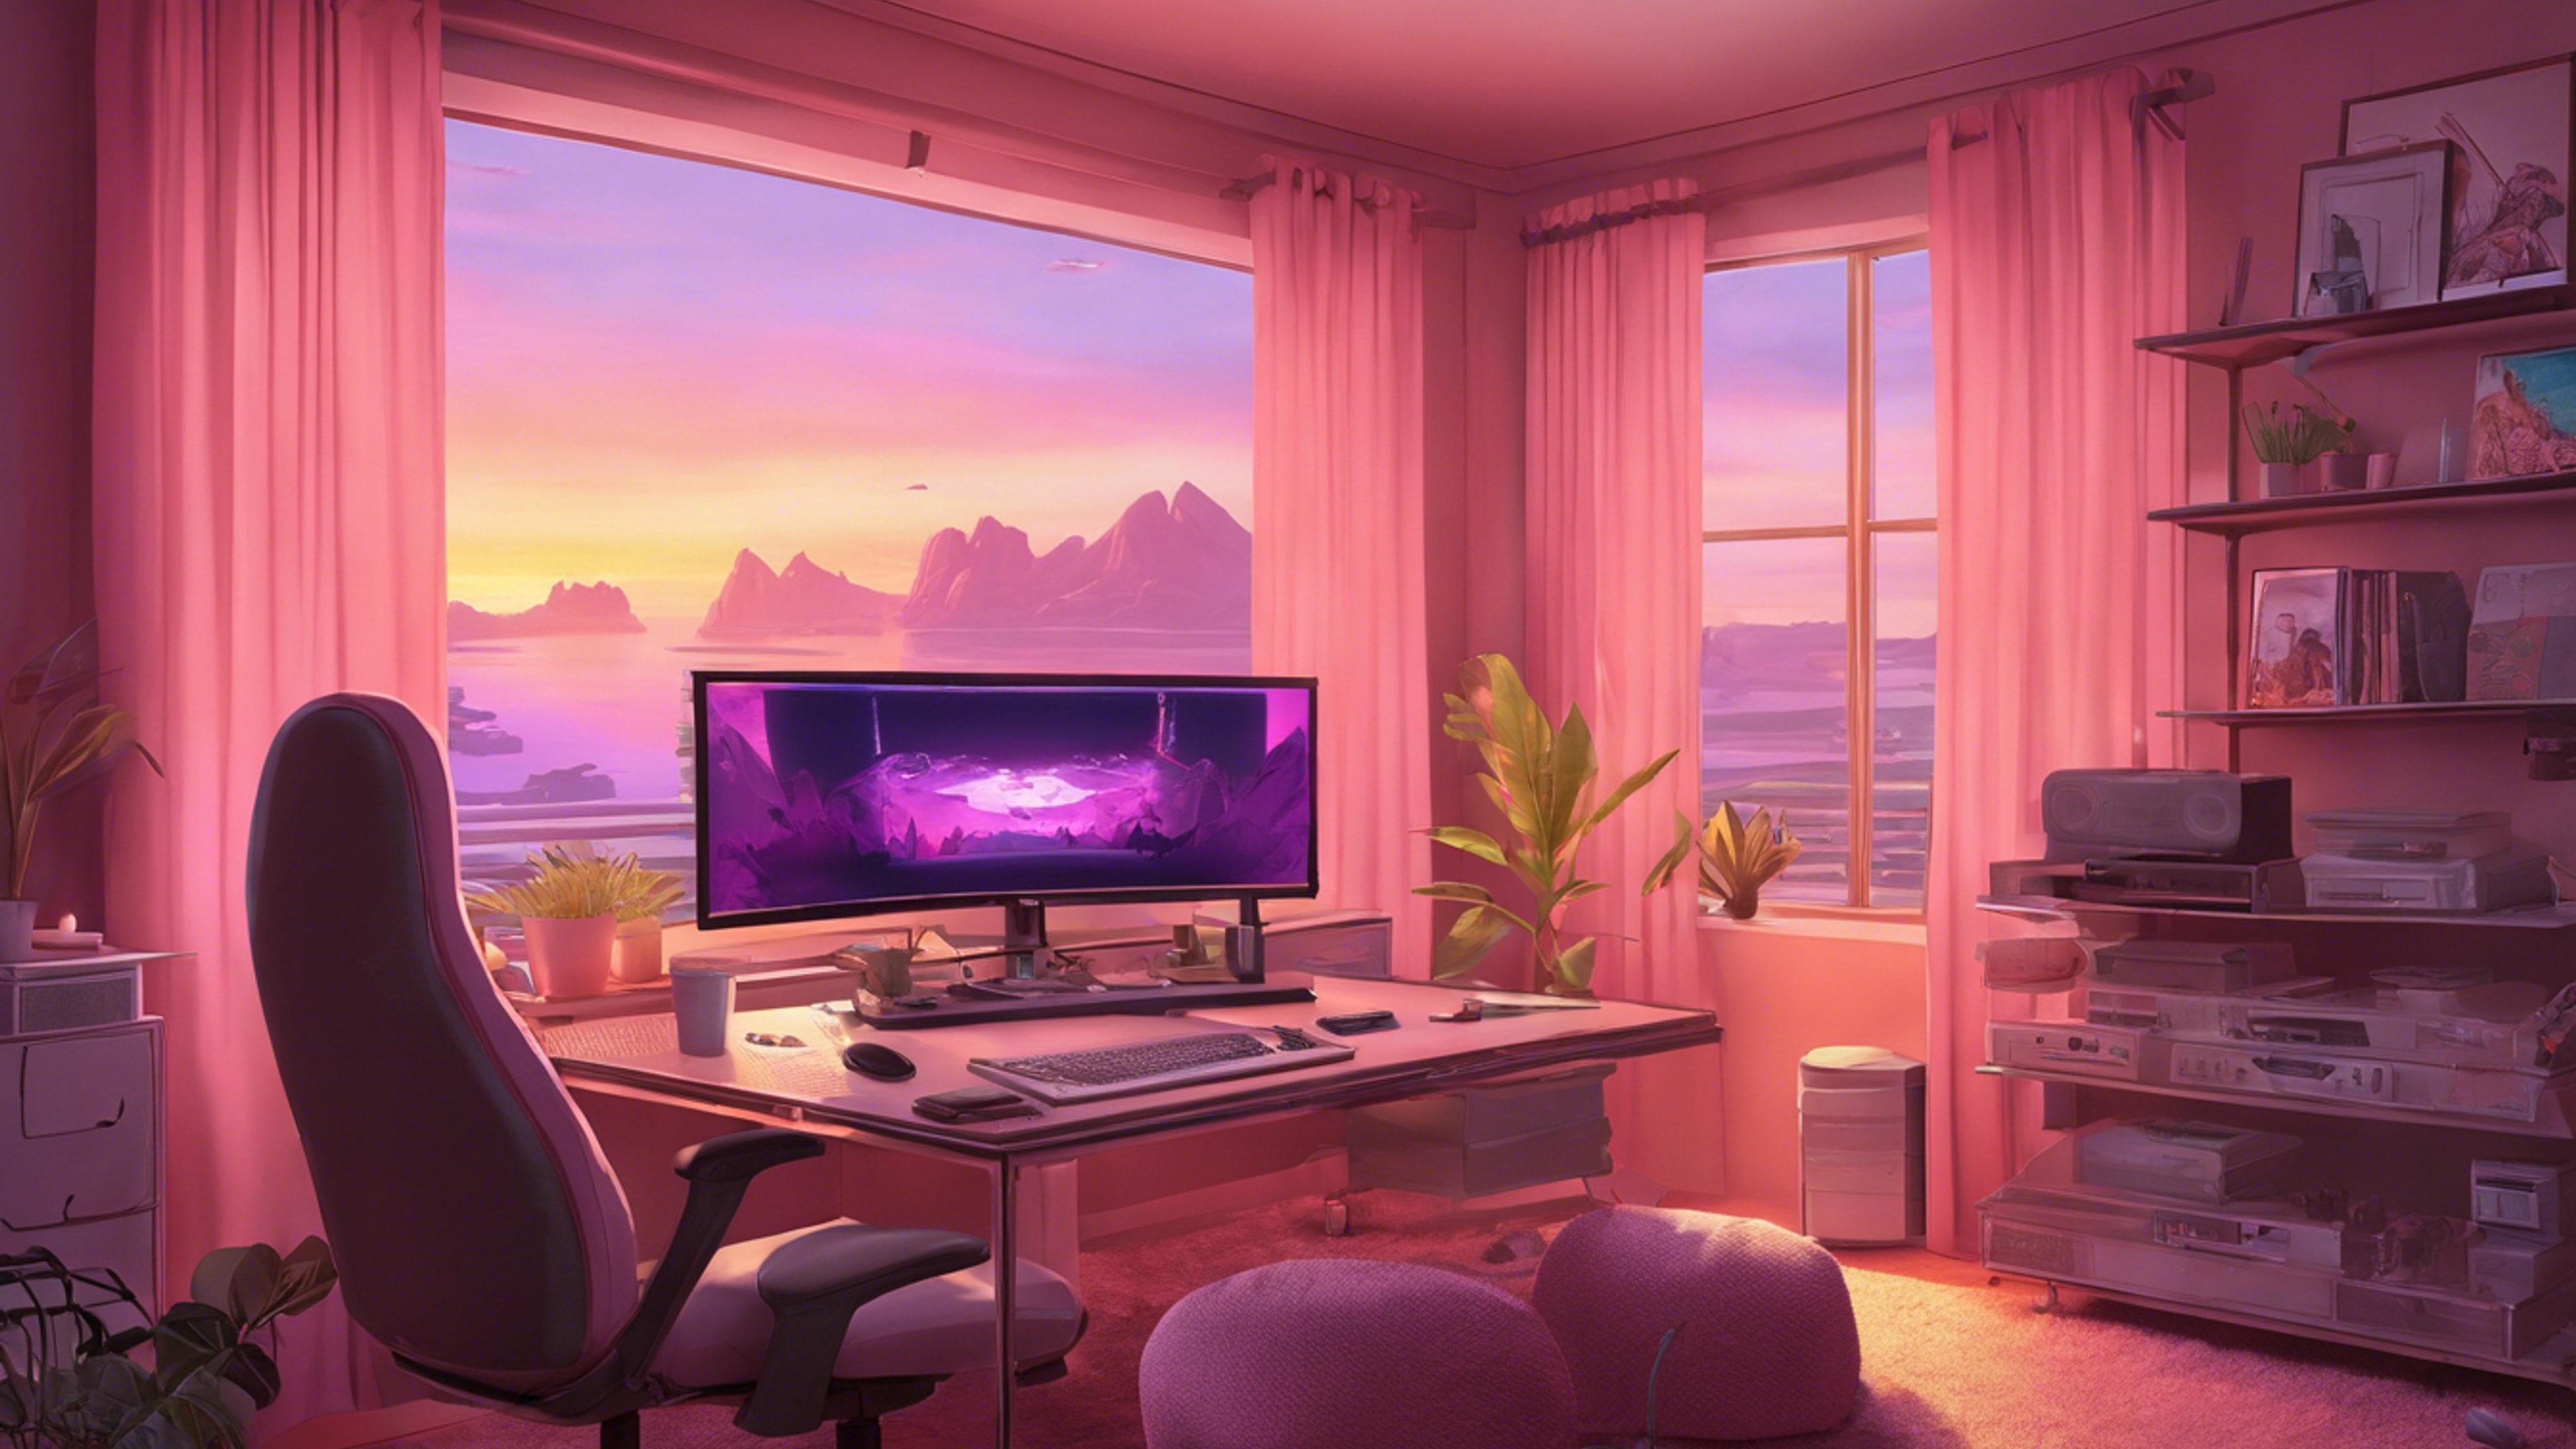 A beautiful shot of a gaming room at dusk with pastel pink curtains slightly drawn, allowing soft sunset hues to blend with the gaming setup's ambient light. Tapeta[98f2c4ff56214265aa5c]